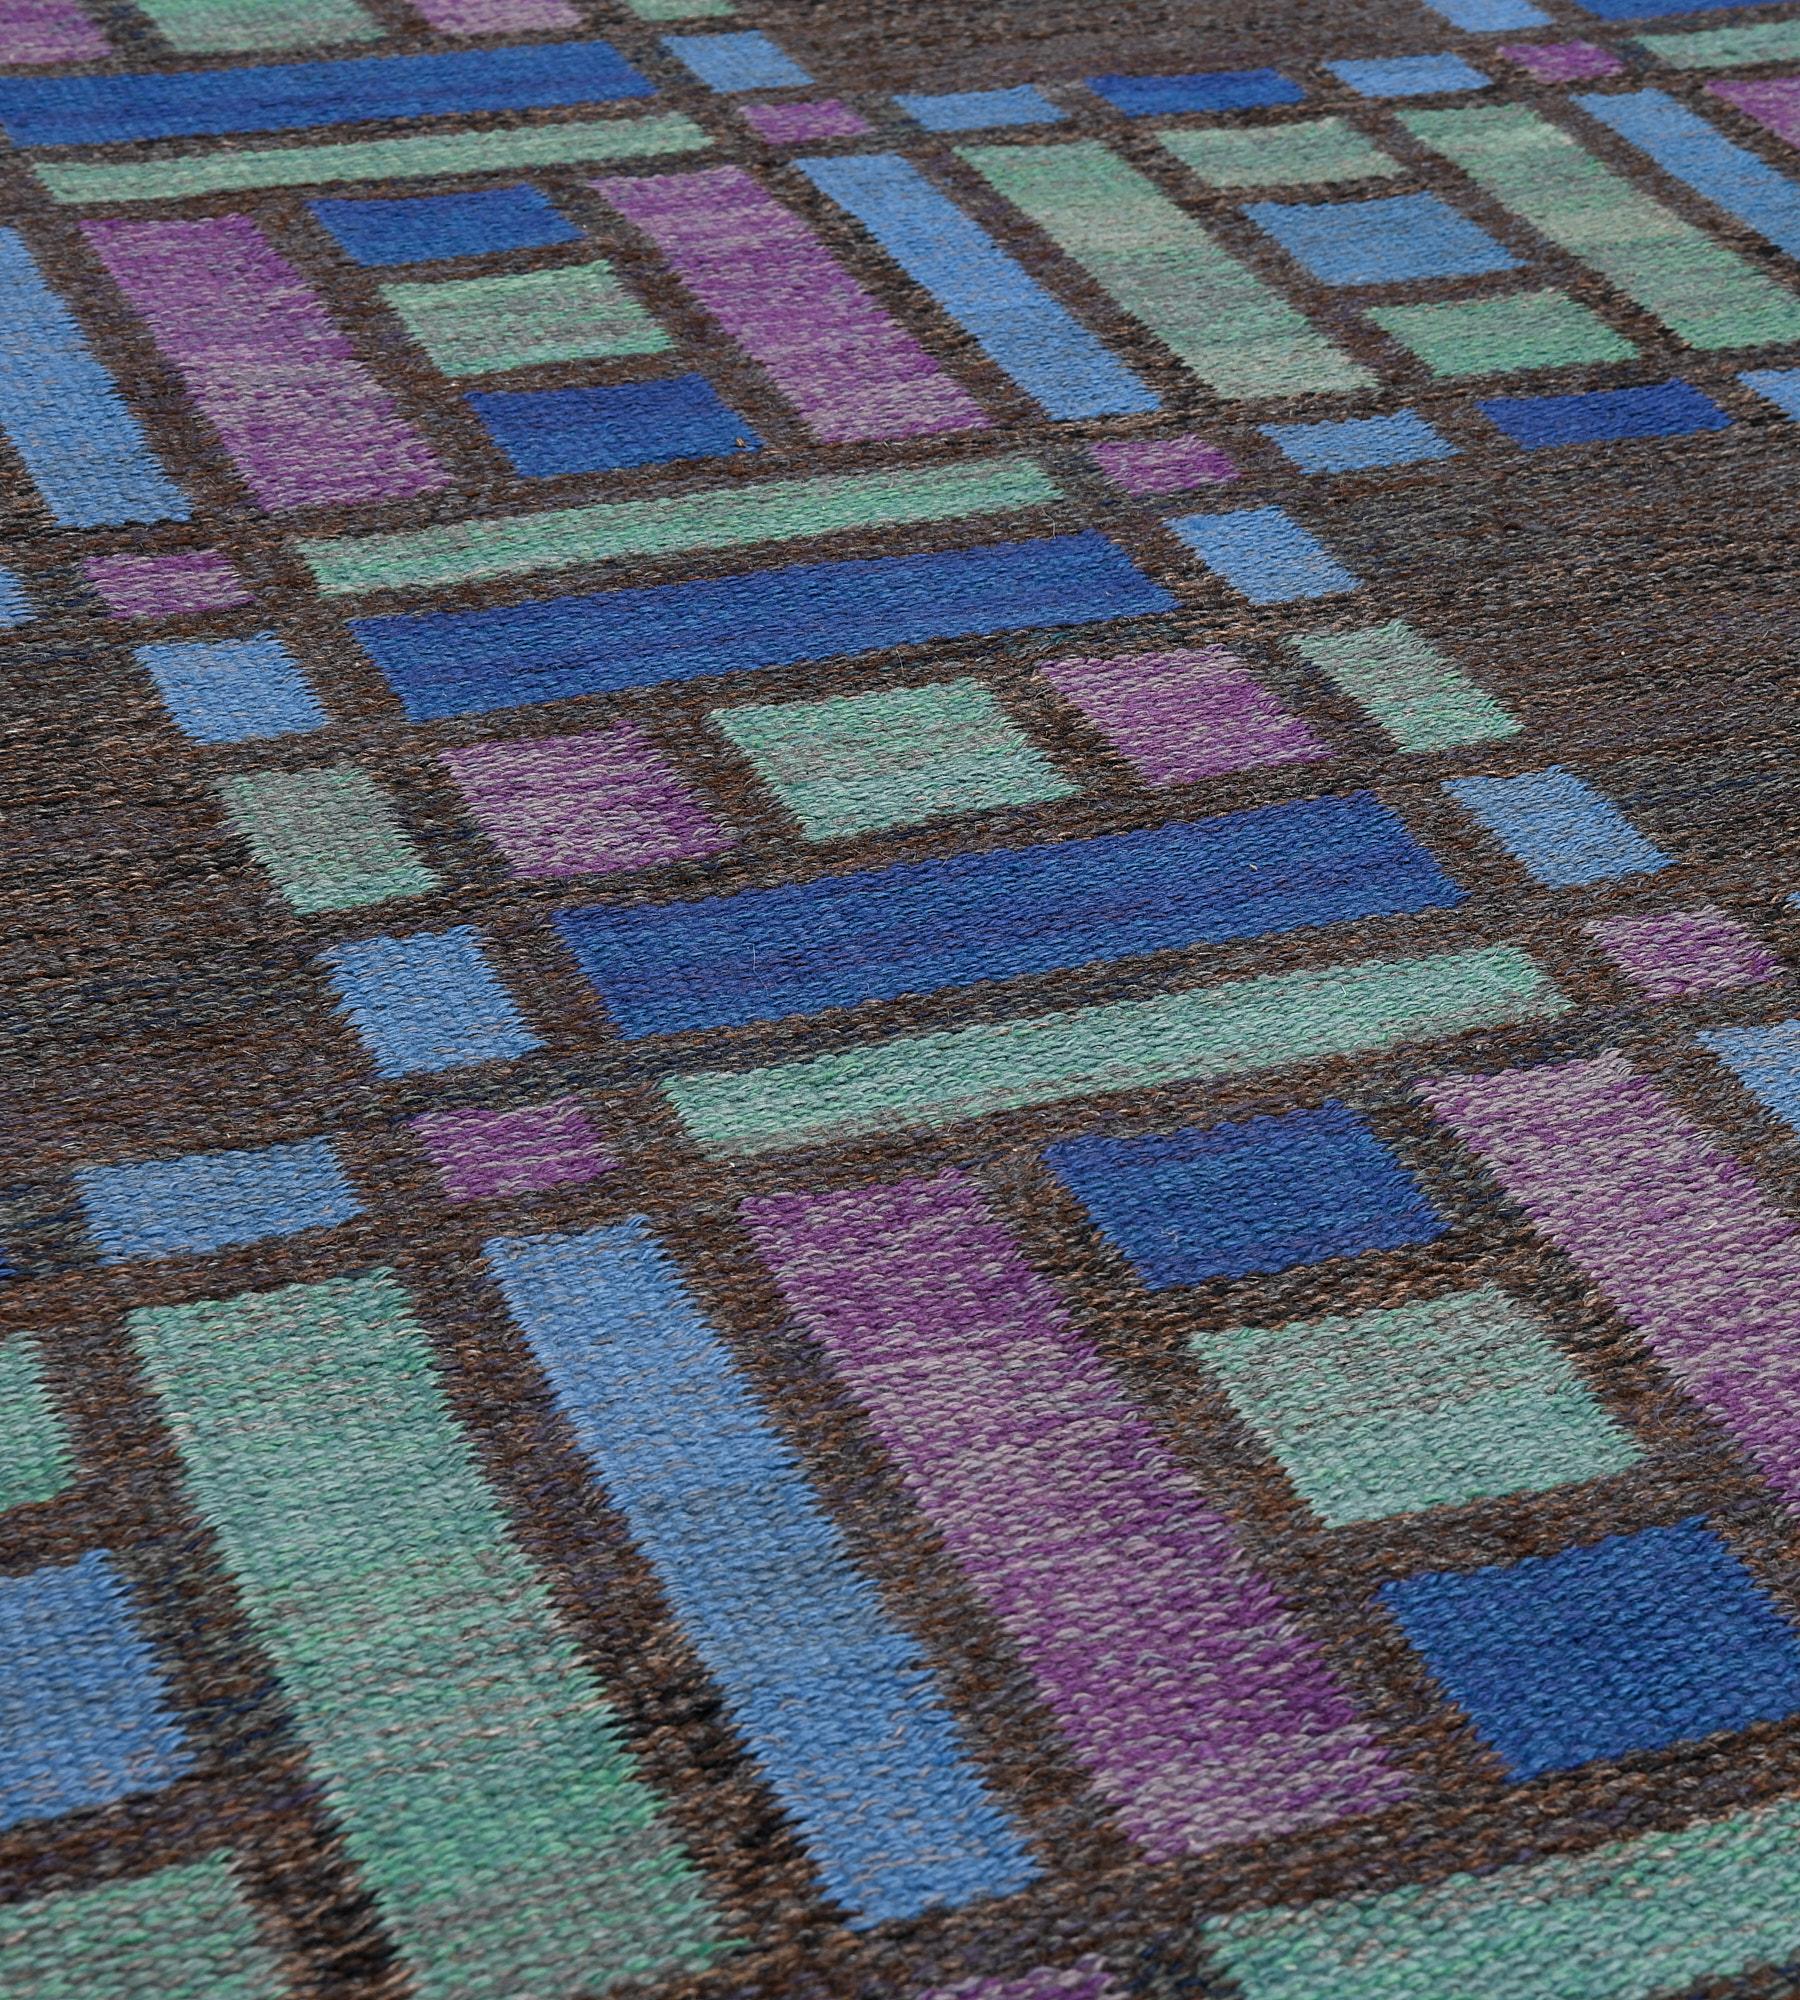 This mid-century Swedish flatweave rug has a charcoal-brown field with two vertical columns and three horizontal rows of pistachio-green, sky-blue, light blue and purple small spaced square and rectangular colors, which together create a